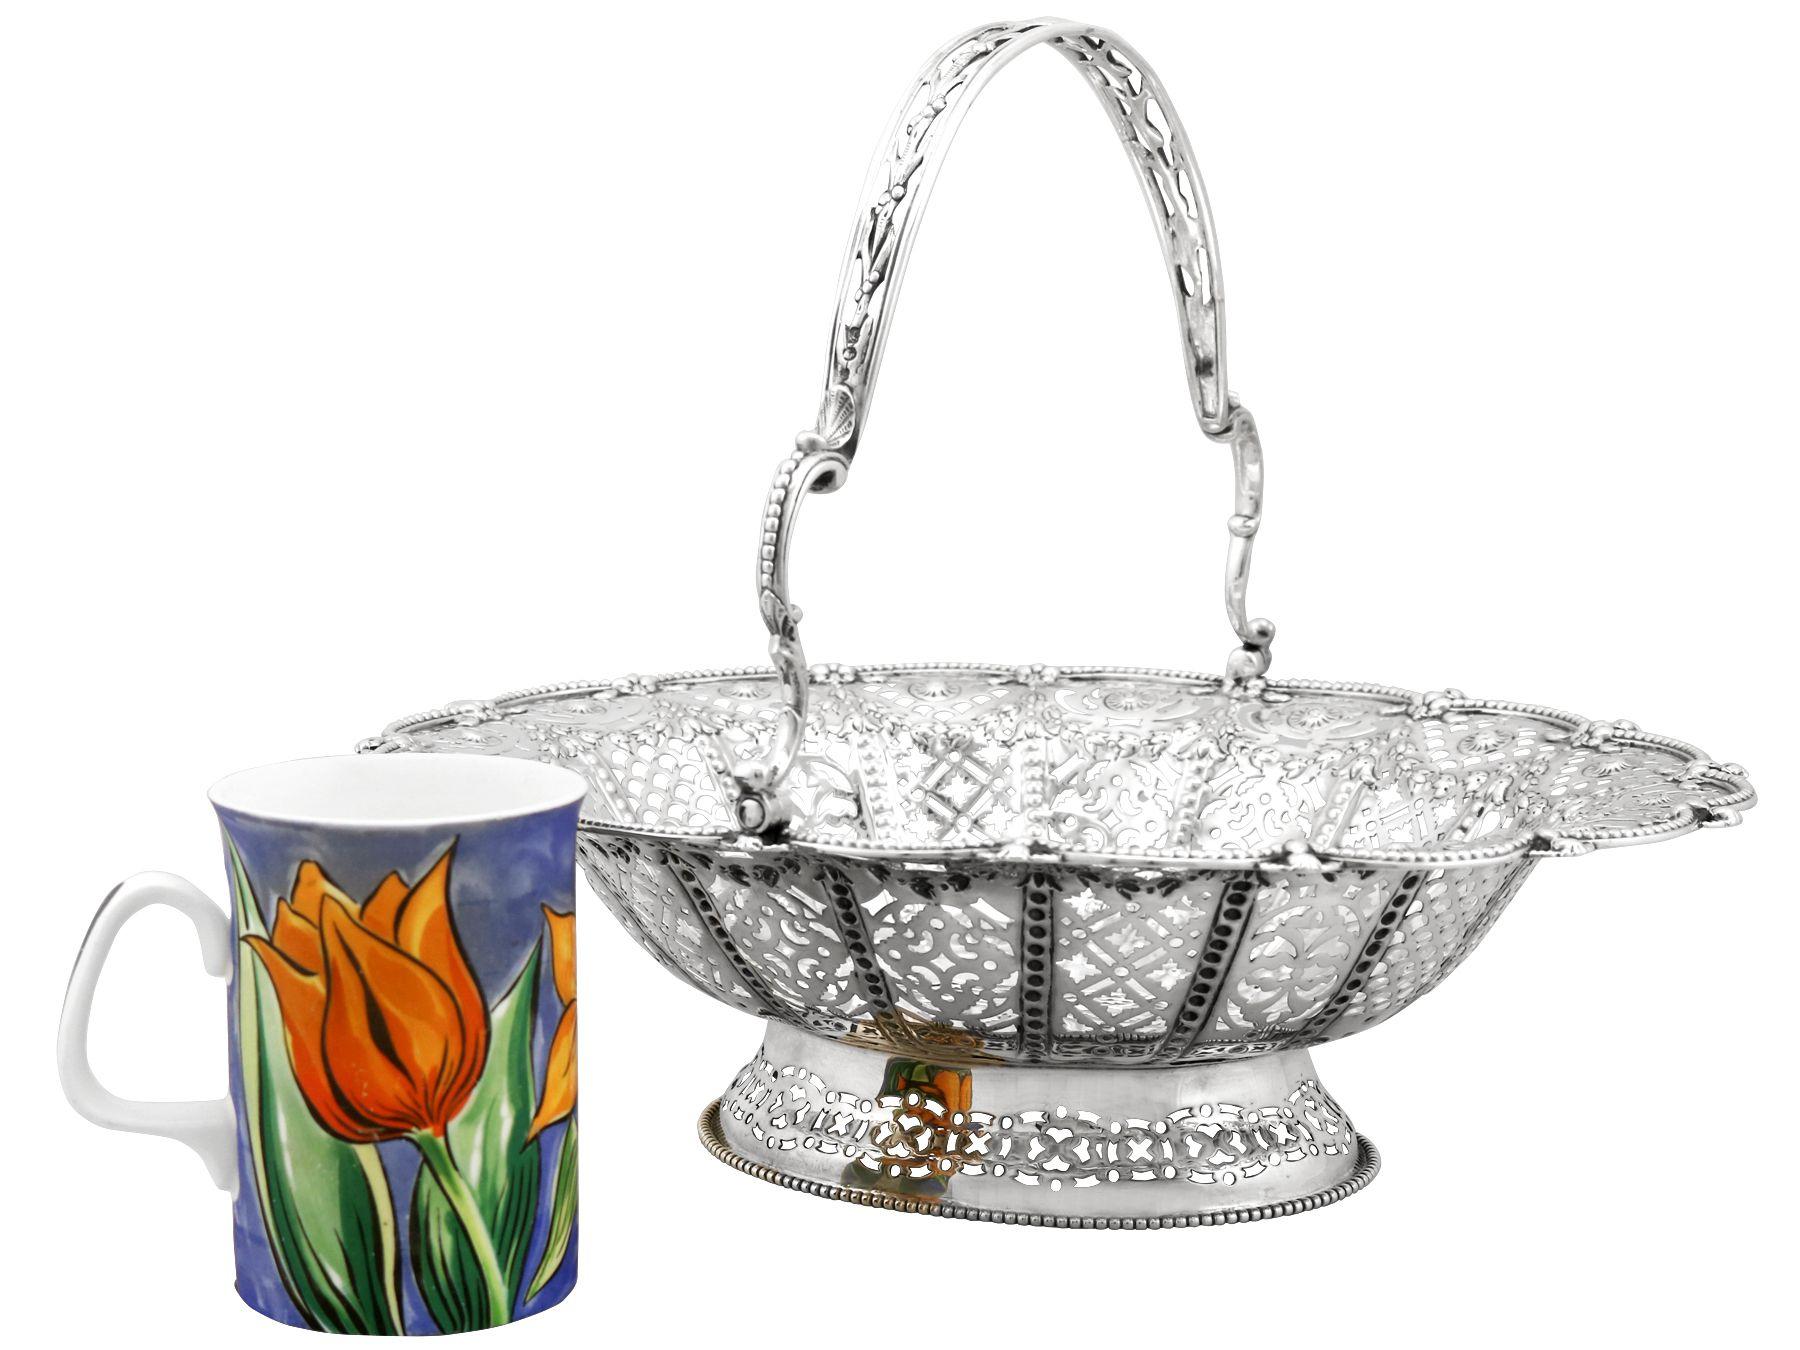 A fine and impressive antique Victorian English sterling silver swing handled cake basket; an addition to our ornamental silverware collection

This fine antique Victorian sterling silver cake basket has an oval rounded form onto a domed oval